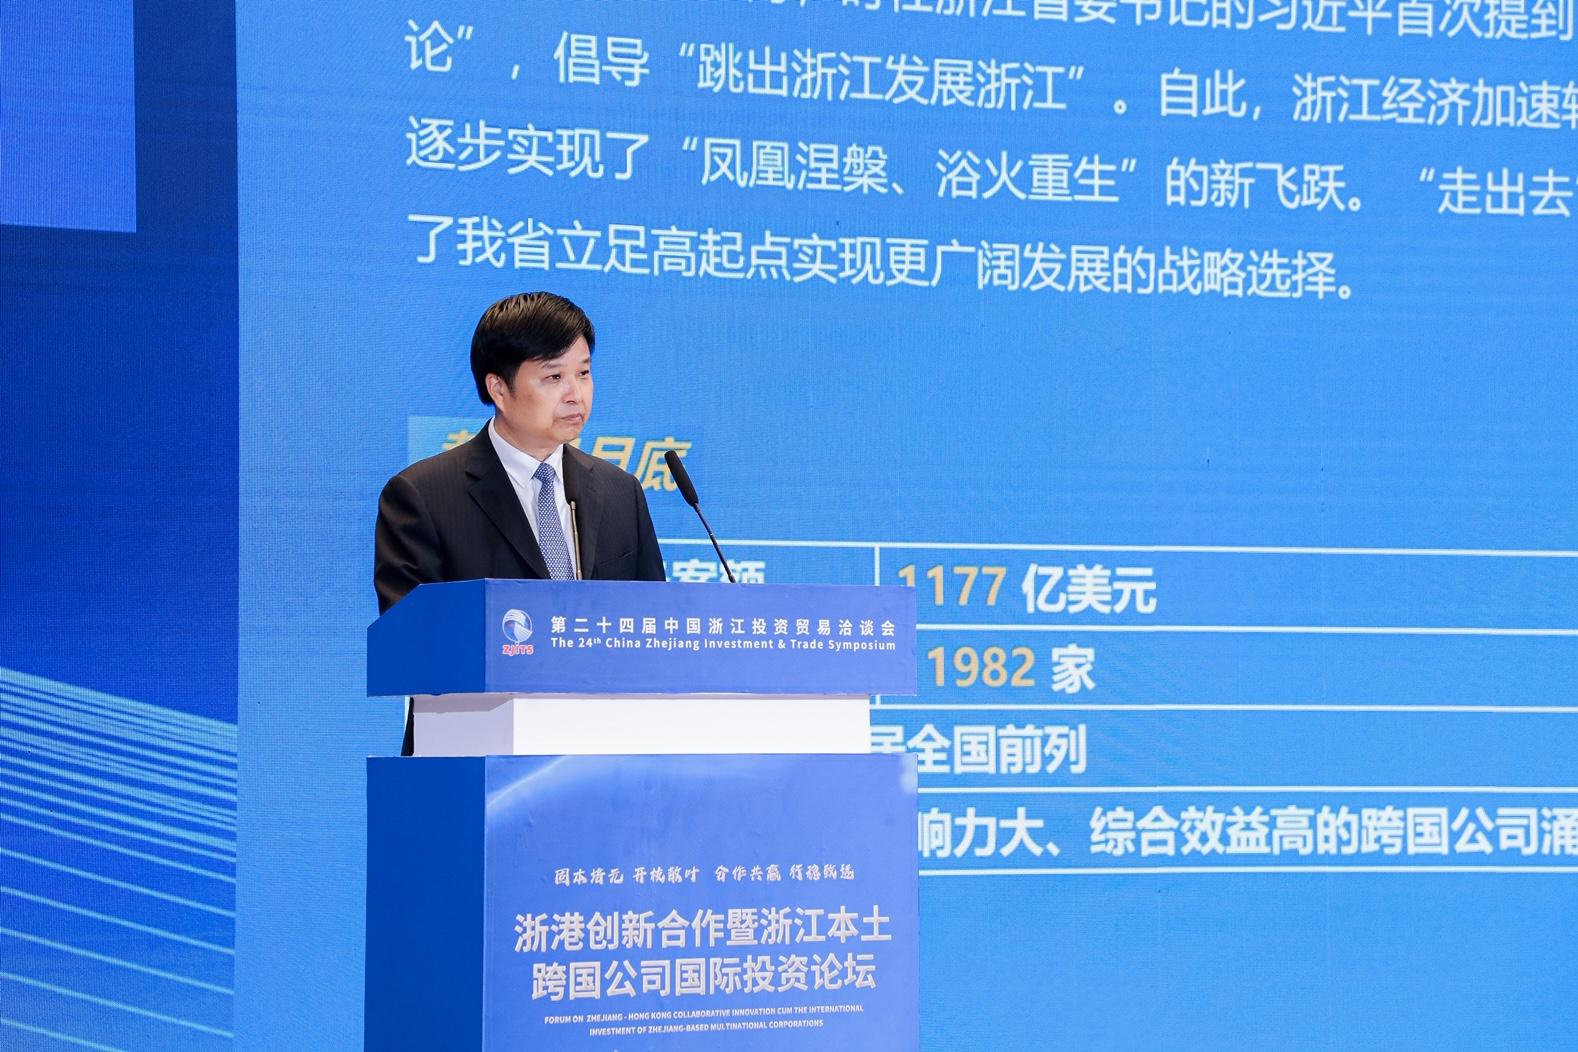 Invest Hong Kong and Mainland government authorities co-hosted a forum in Hangzhou, Zhejiang Province today (May 18), encouraging Zhejiang enterprises to make use of Hong Kong's business advantages and opportunities in innovation development amid the Belt and Road Initiative and the Guangdong-Hong Kong-Macao Greater Bay Area development to accelerate their overseas expansion. Photo shows the Director of Department of Commerce of Zhejiang Province, Mr Han Jie, talking about Zhejiang Provincial Party Committee's commitment in making the province a source of high-level outward investment, which sets out clearly the direction for the province to continue to open up to the world.